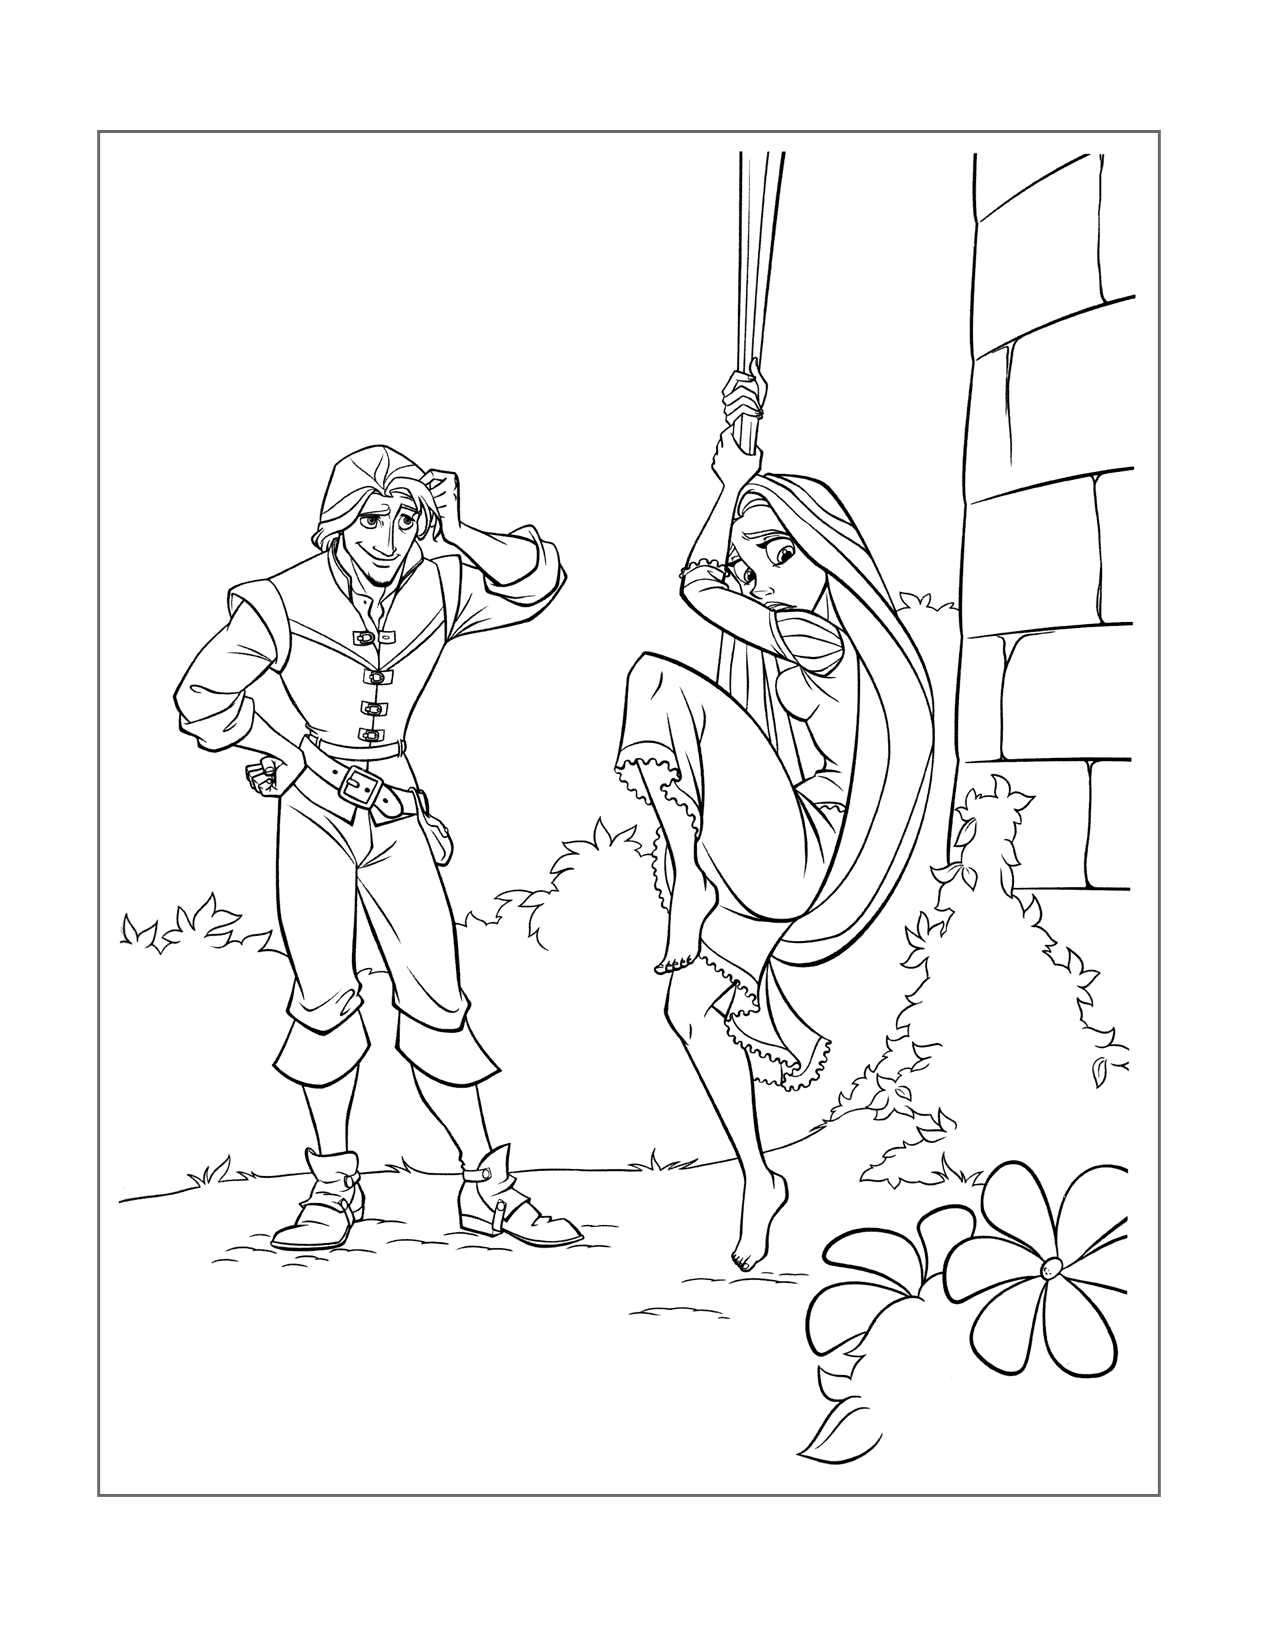 Rapunzel Goes Outside Coloring Page